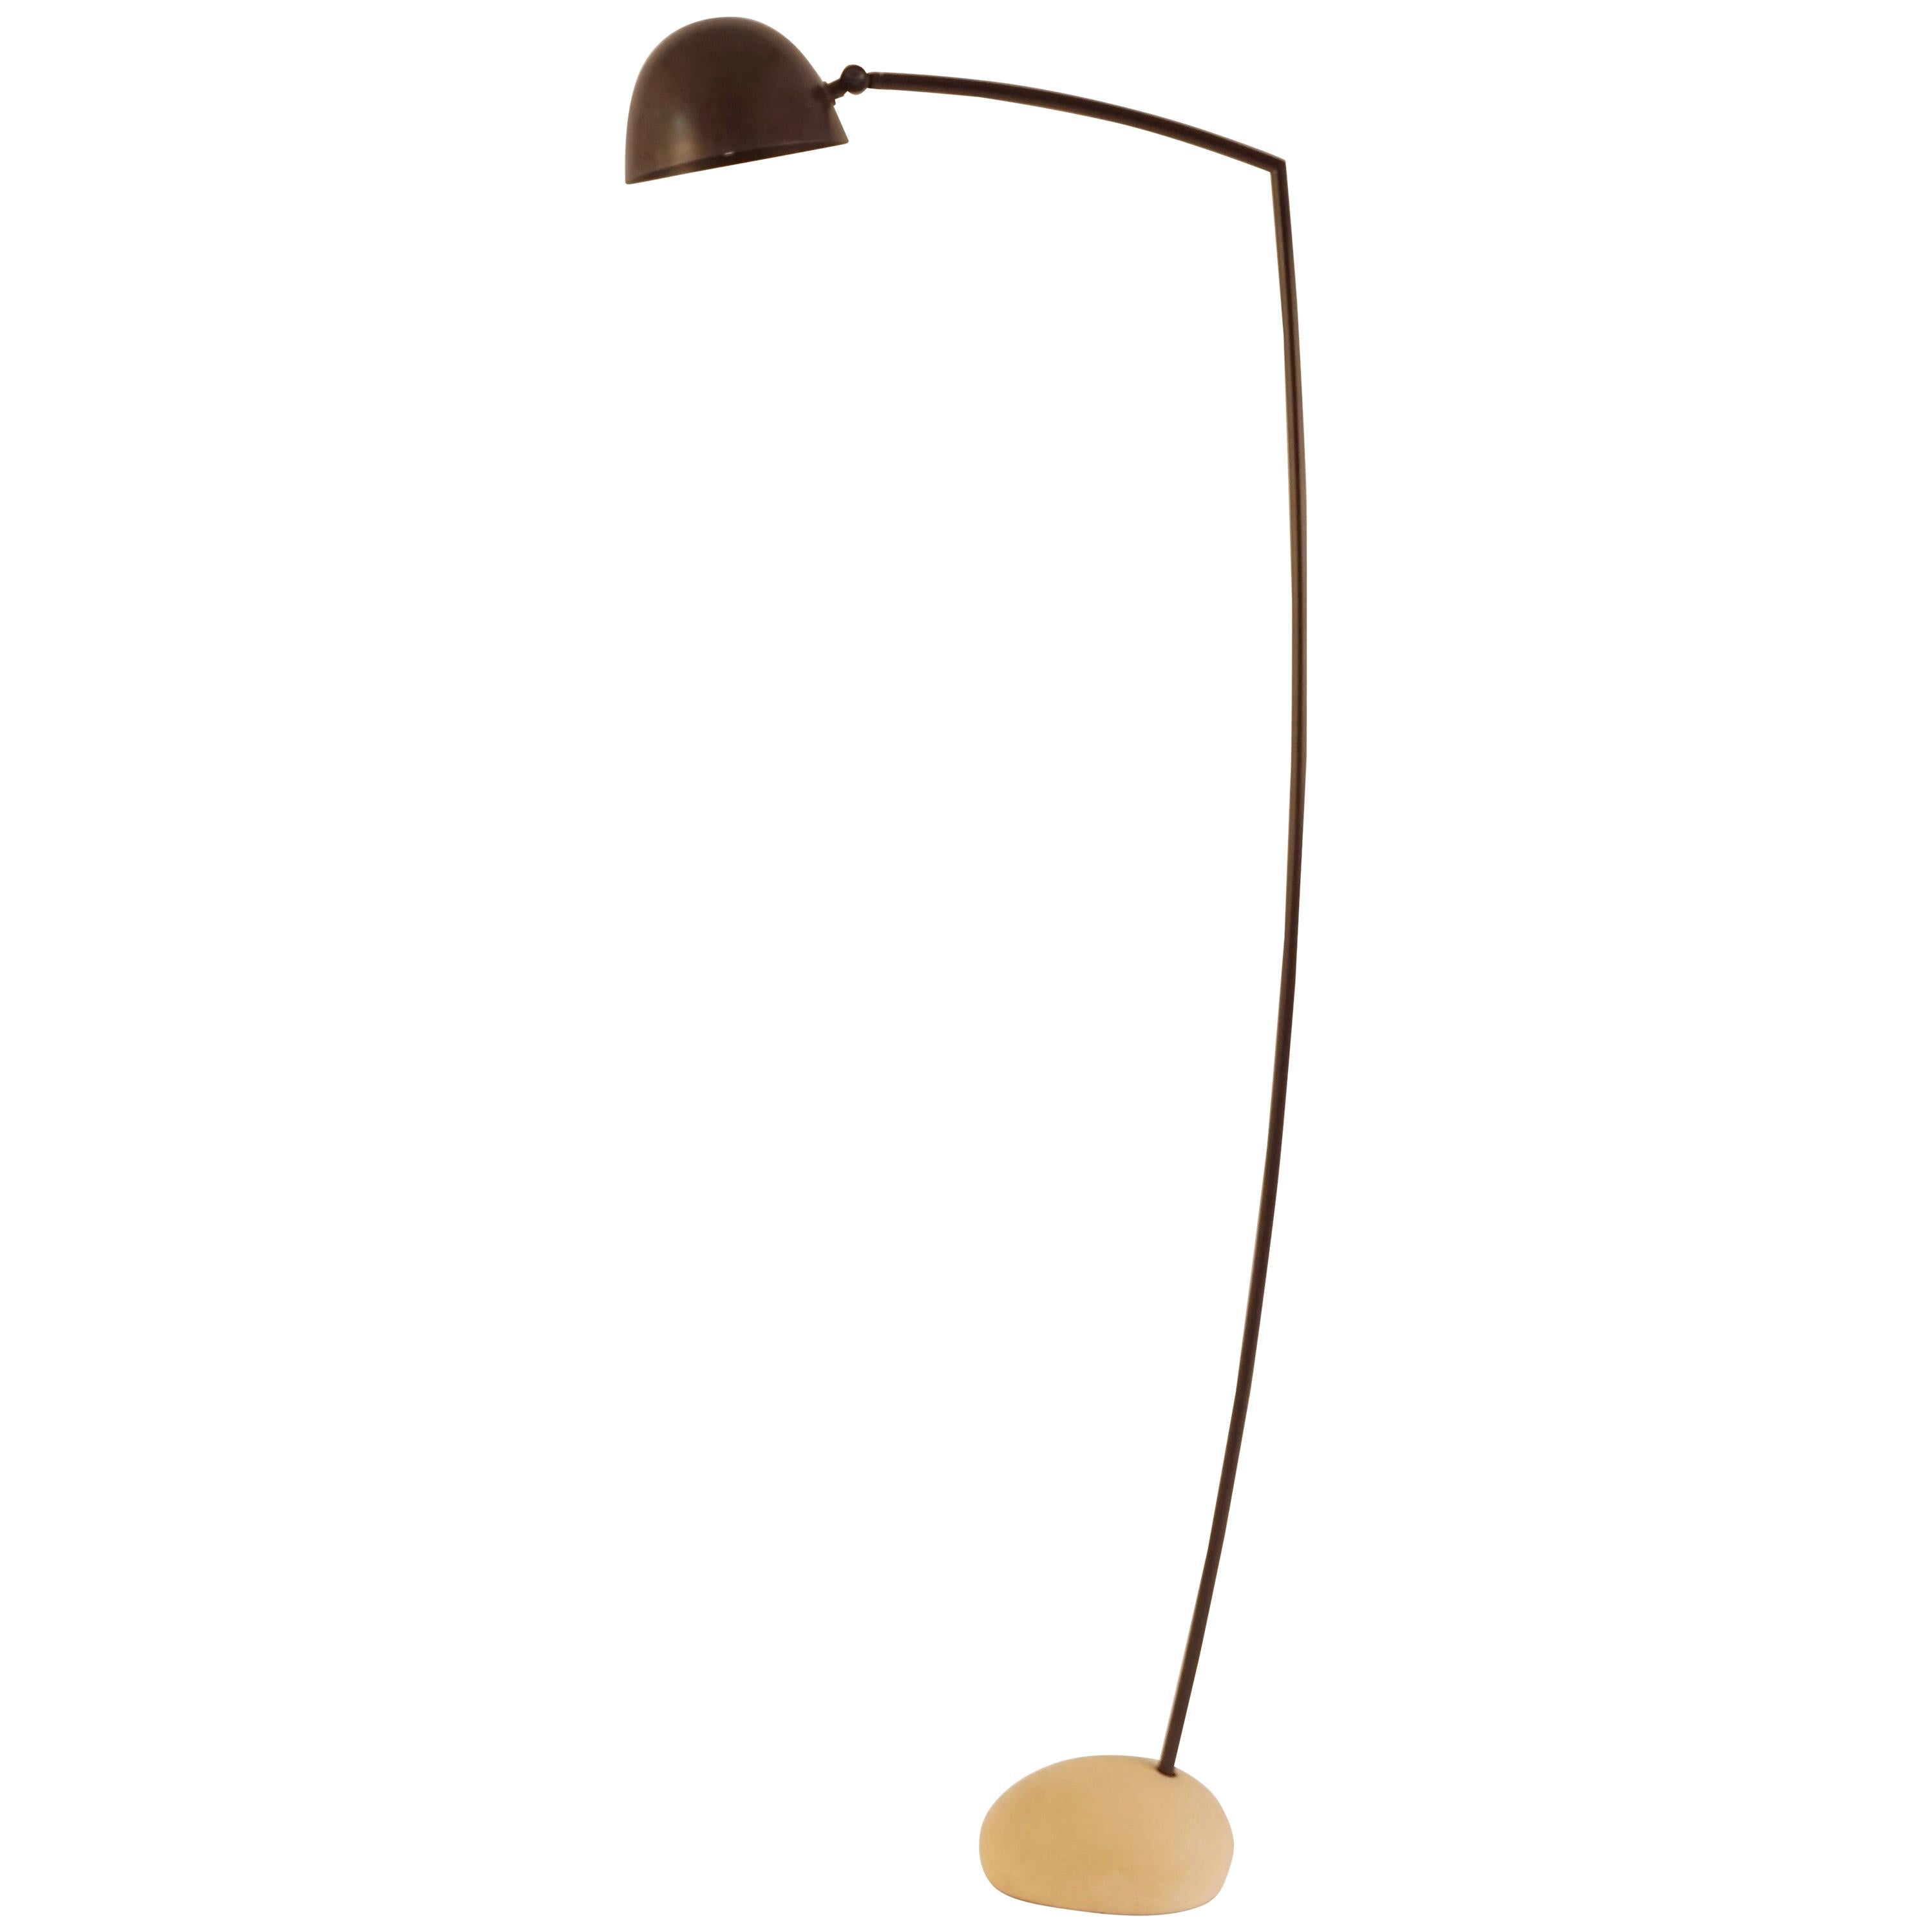 Skye Floor Lamp Medium, with Spun Bronze Shade and Stone Shaped Cement Base